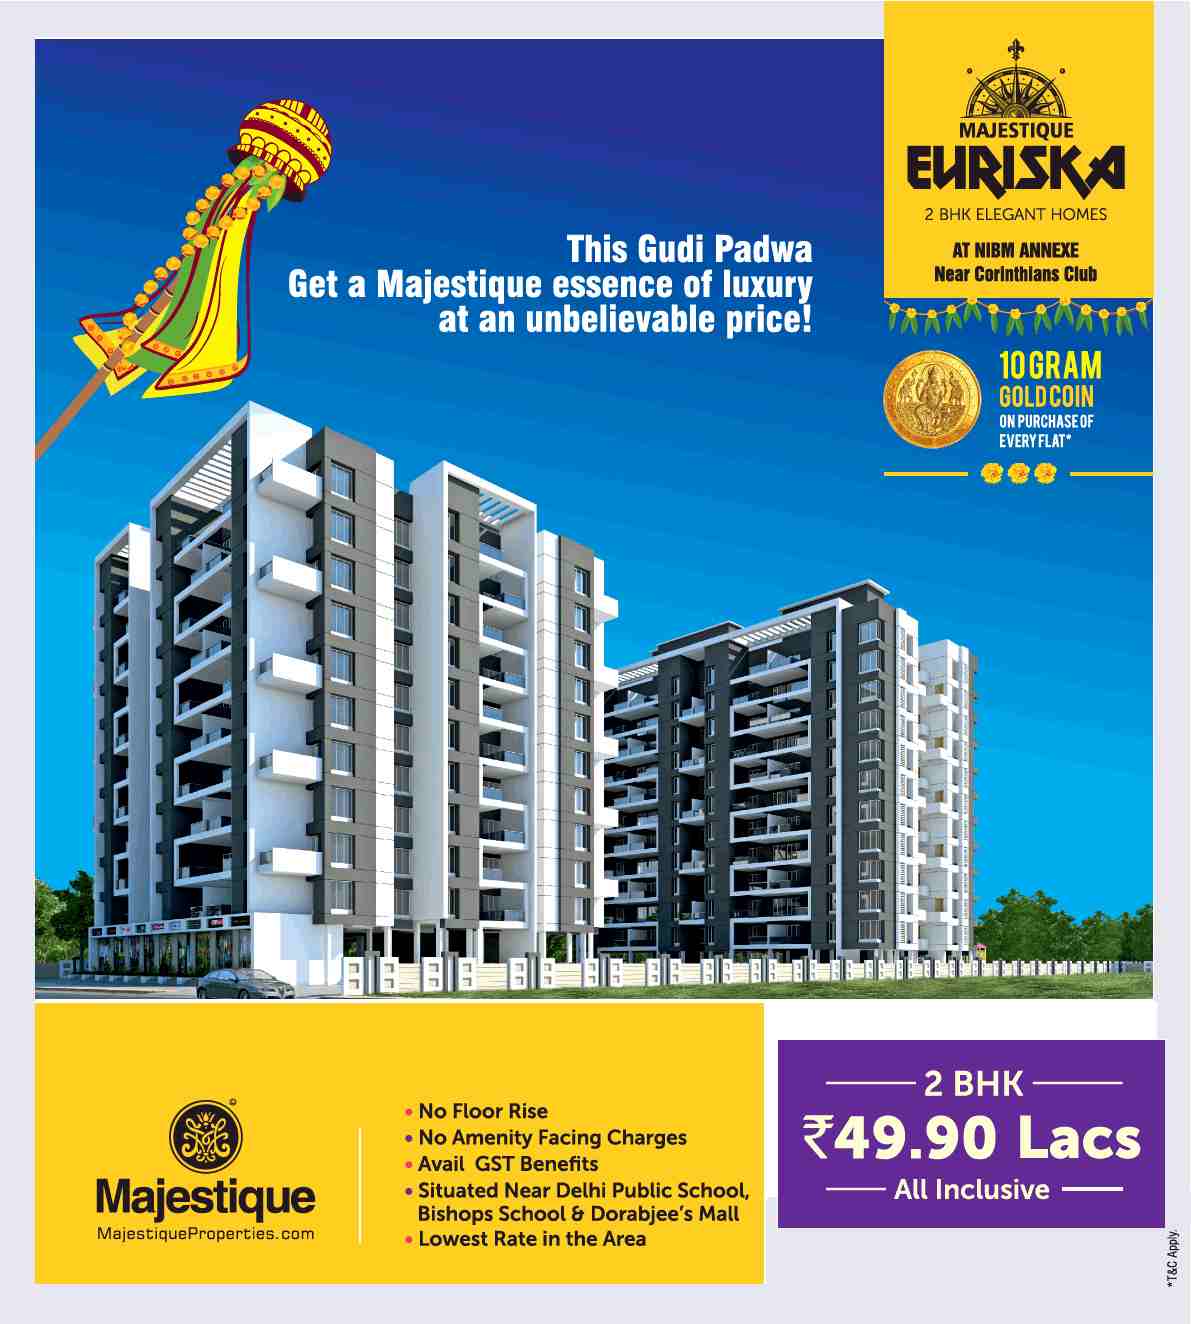 Get a majestique essence of luxury at unbelievable price at Majestique Euriska in Pune Update